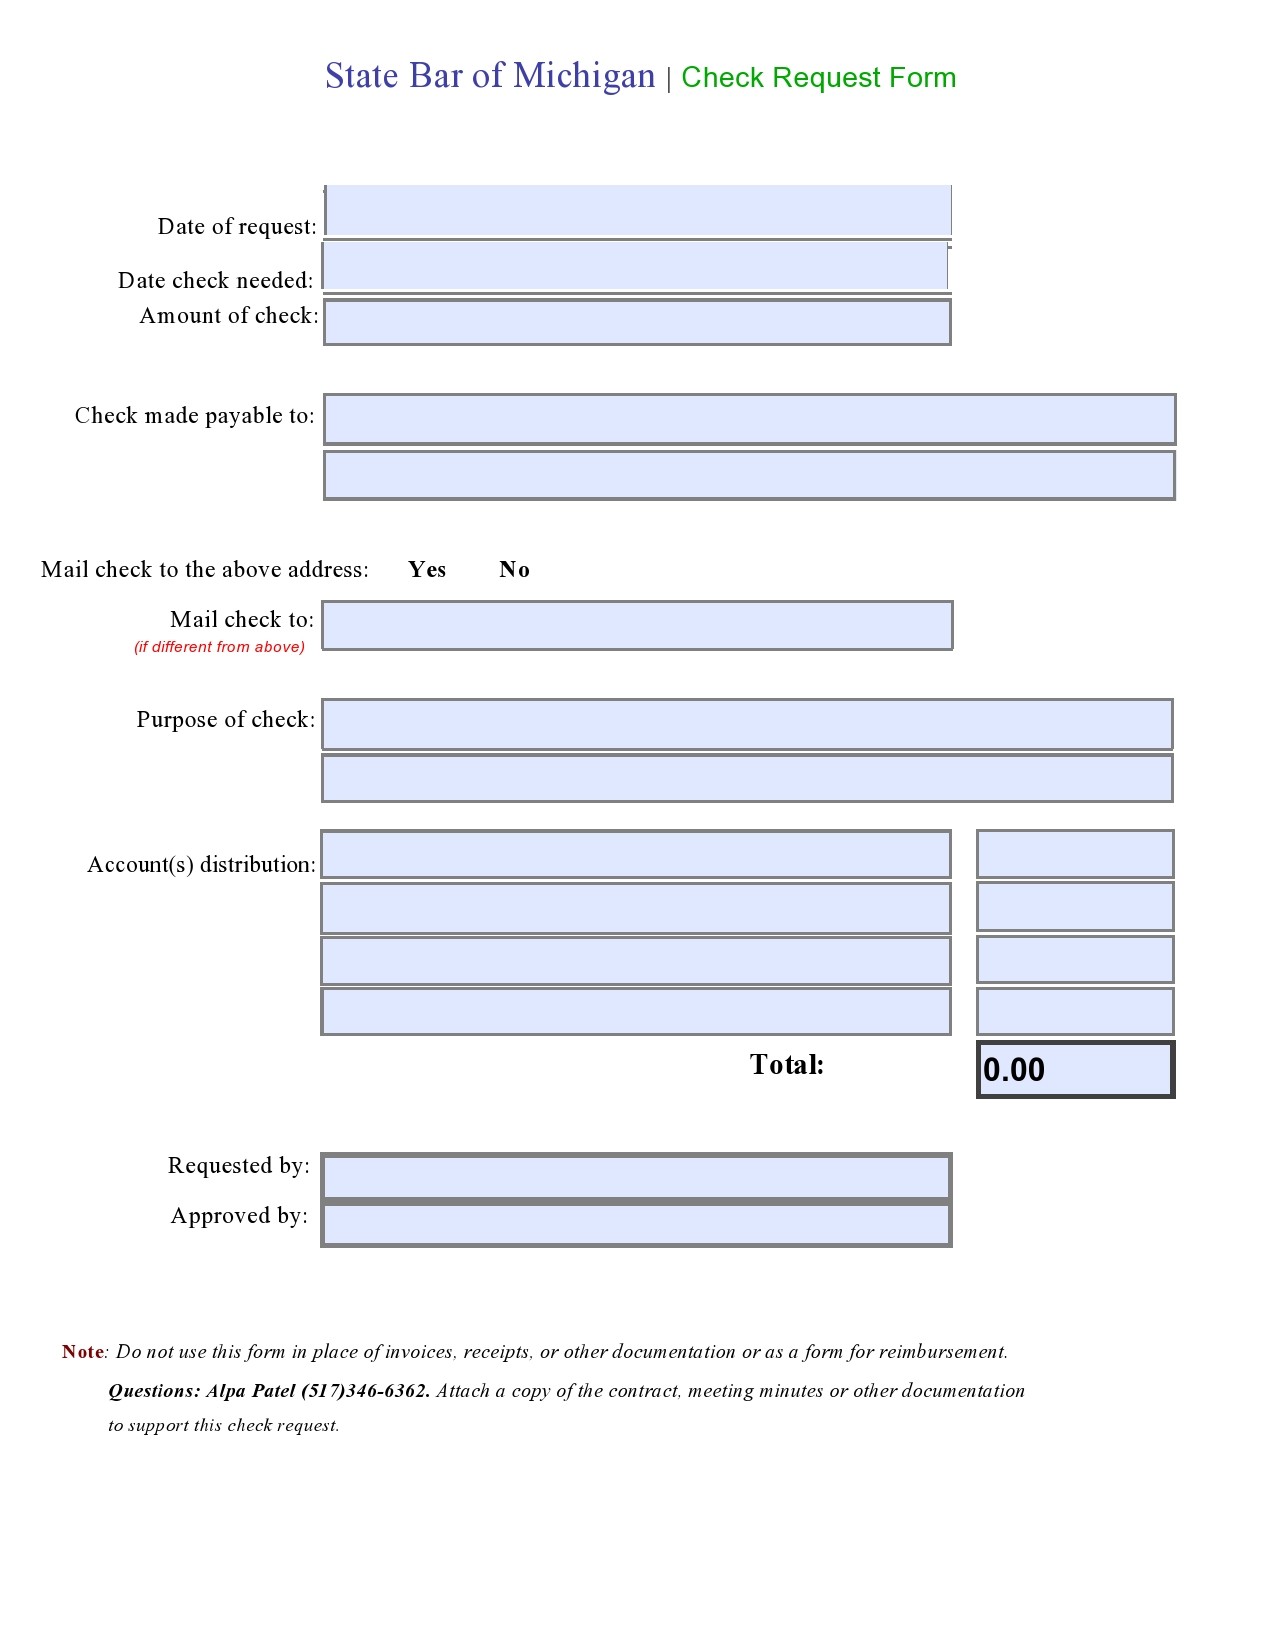 50 Free Check Request Forms Word Excel PDF ᐅ TemplateLab